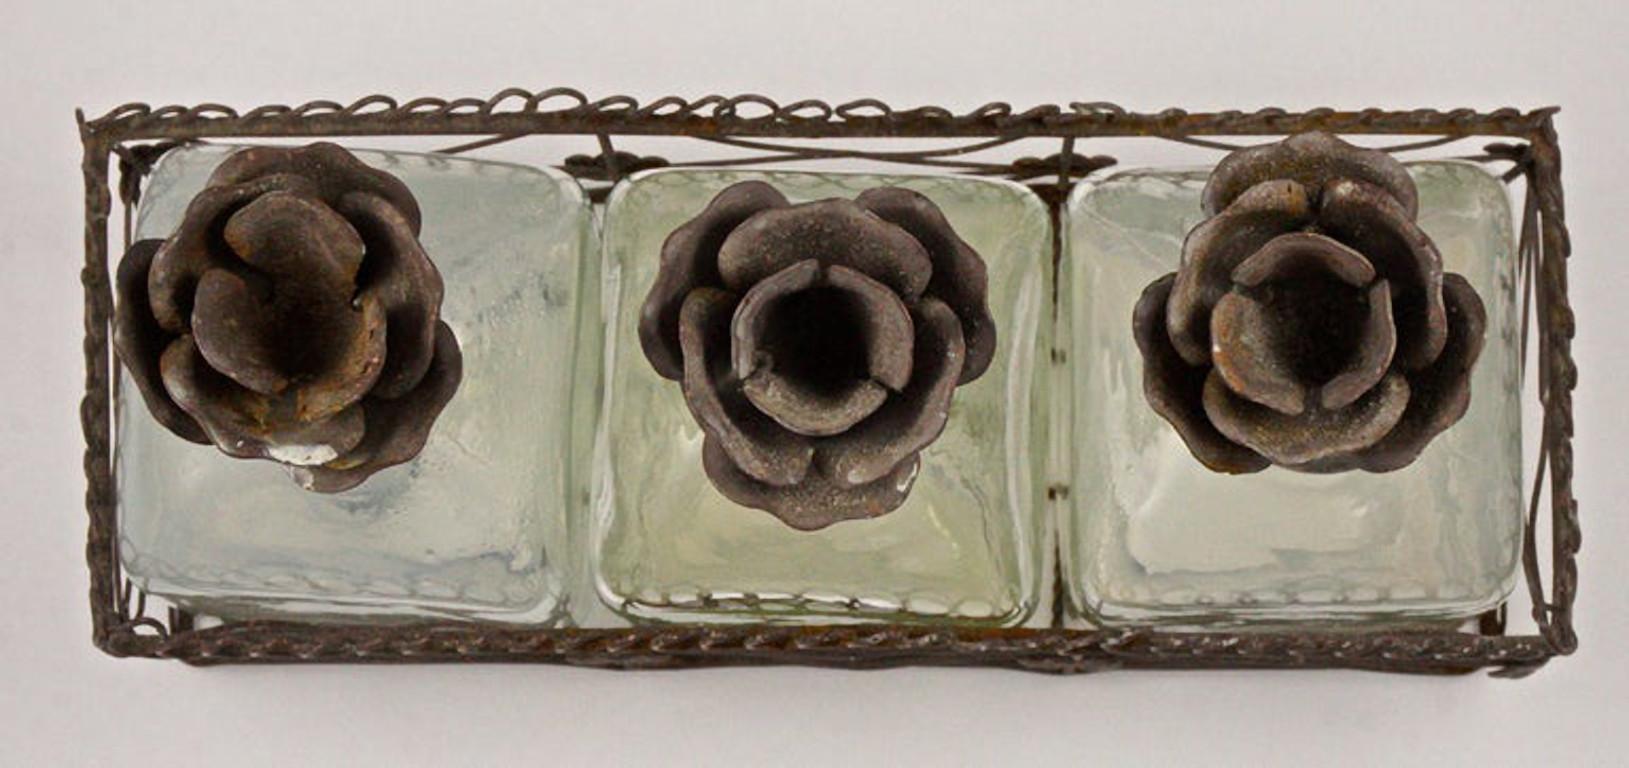 20th Century French Bottles with Flower Cork Stoppers in a Wire Basket Holder, circa 1950s For Sale